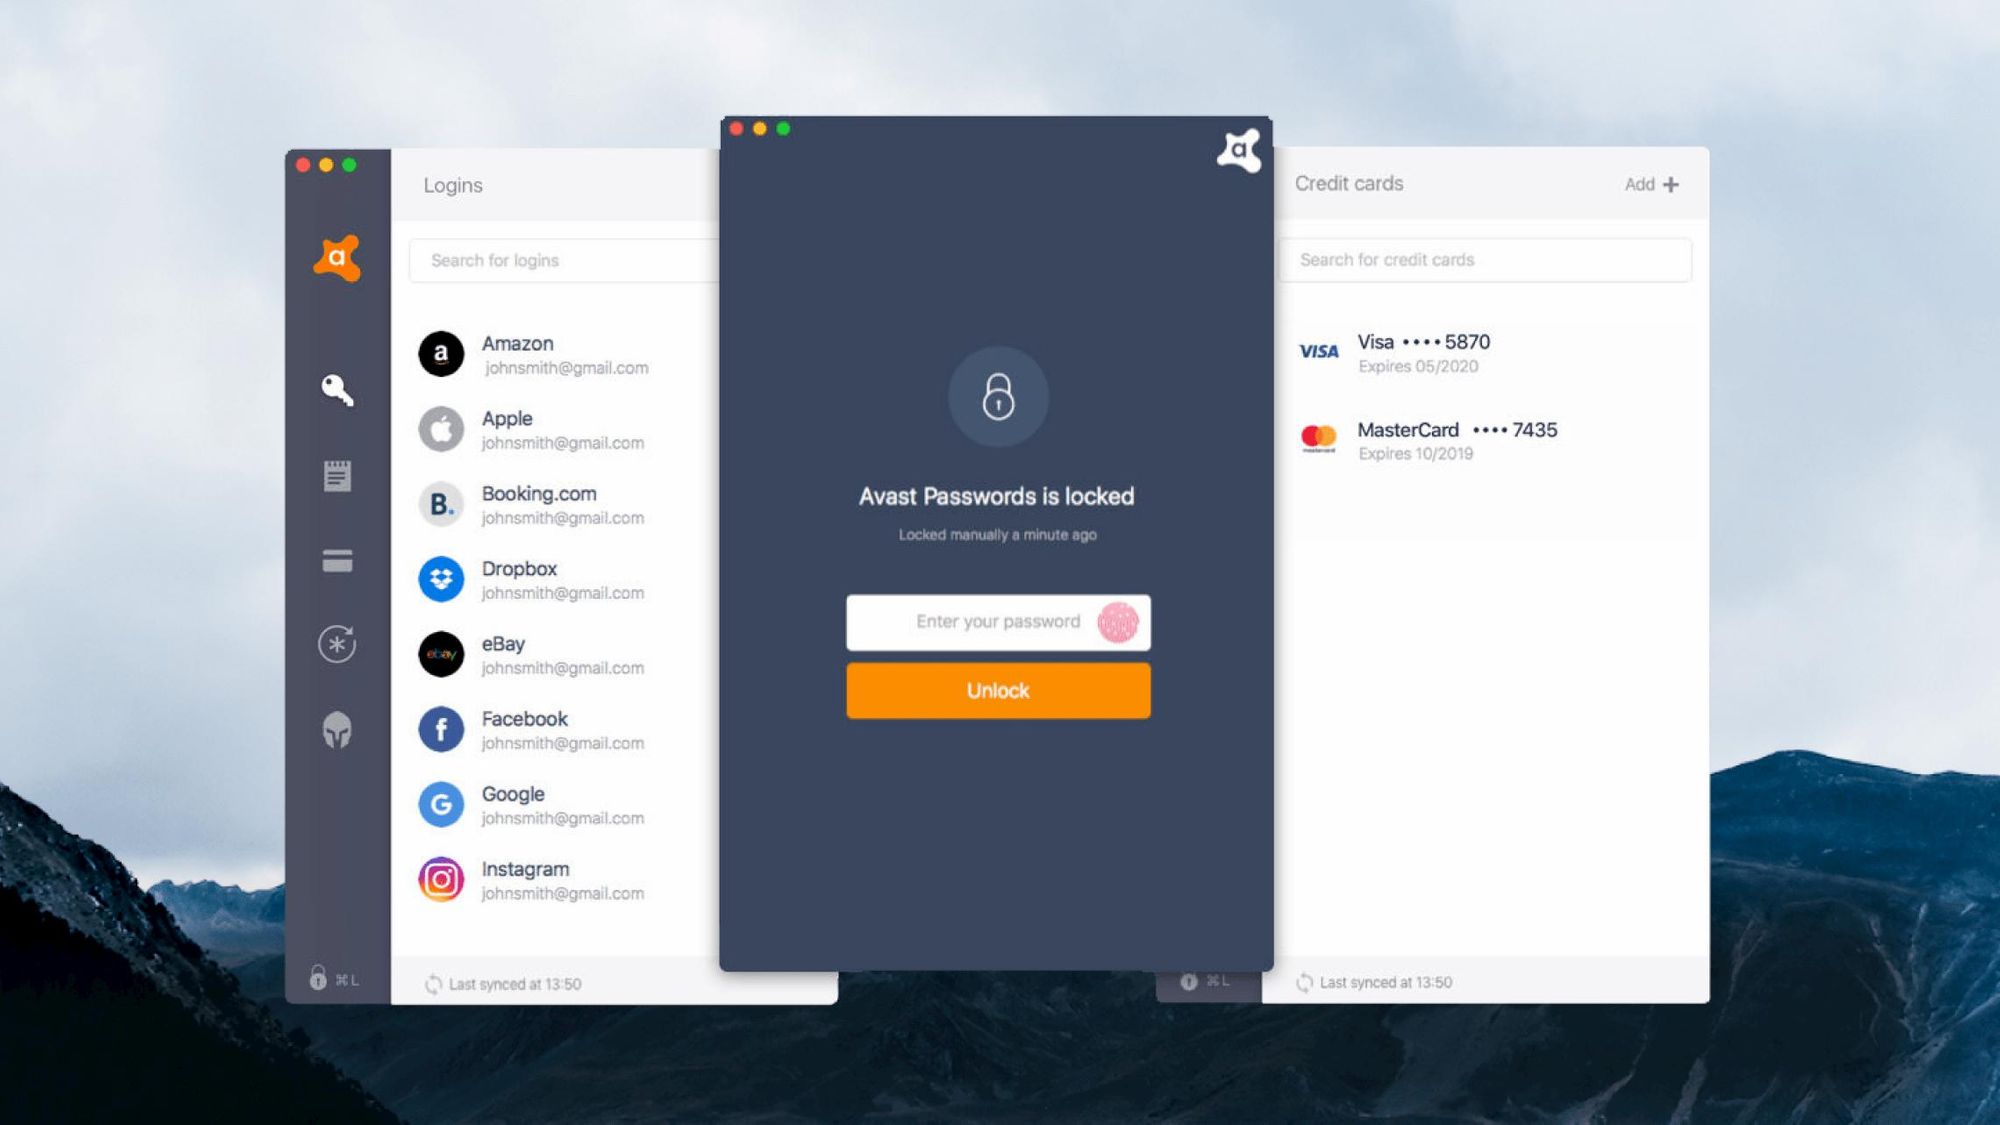 avast password manager